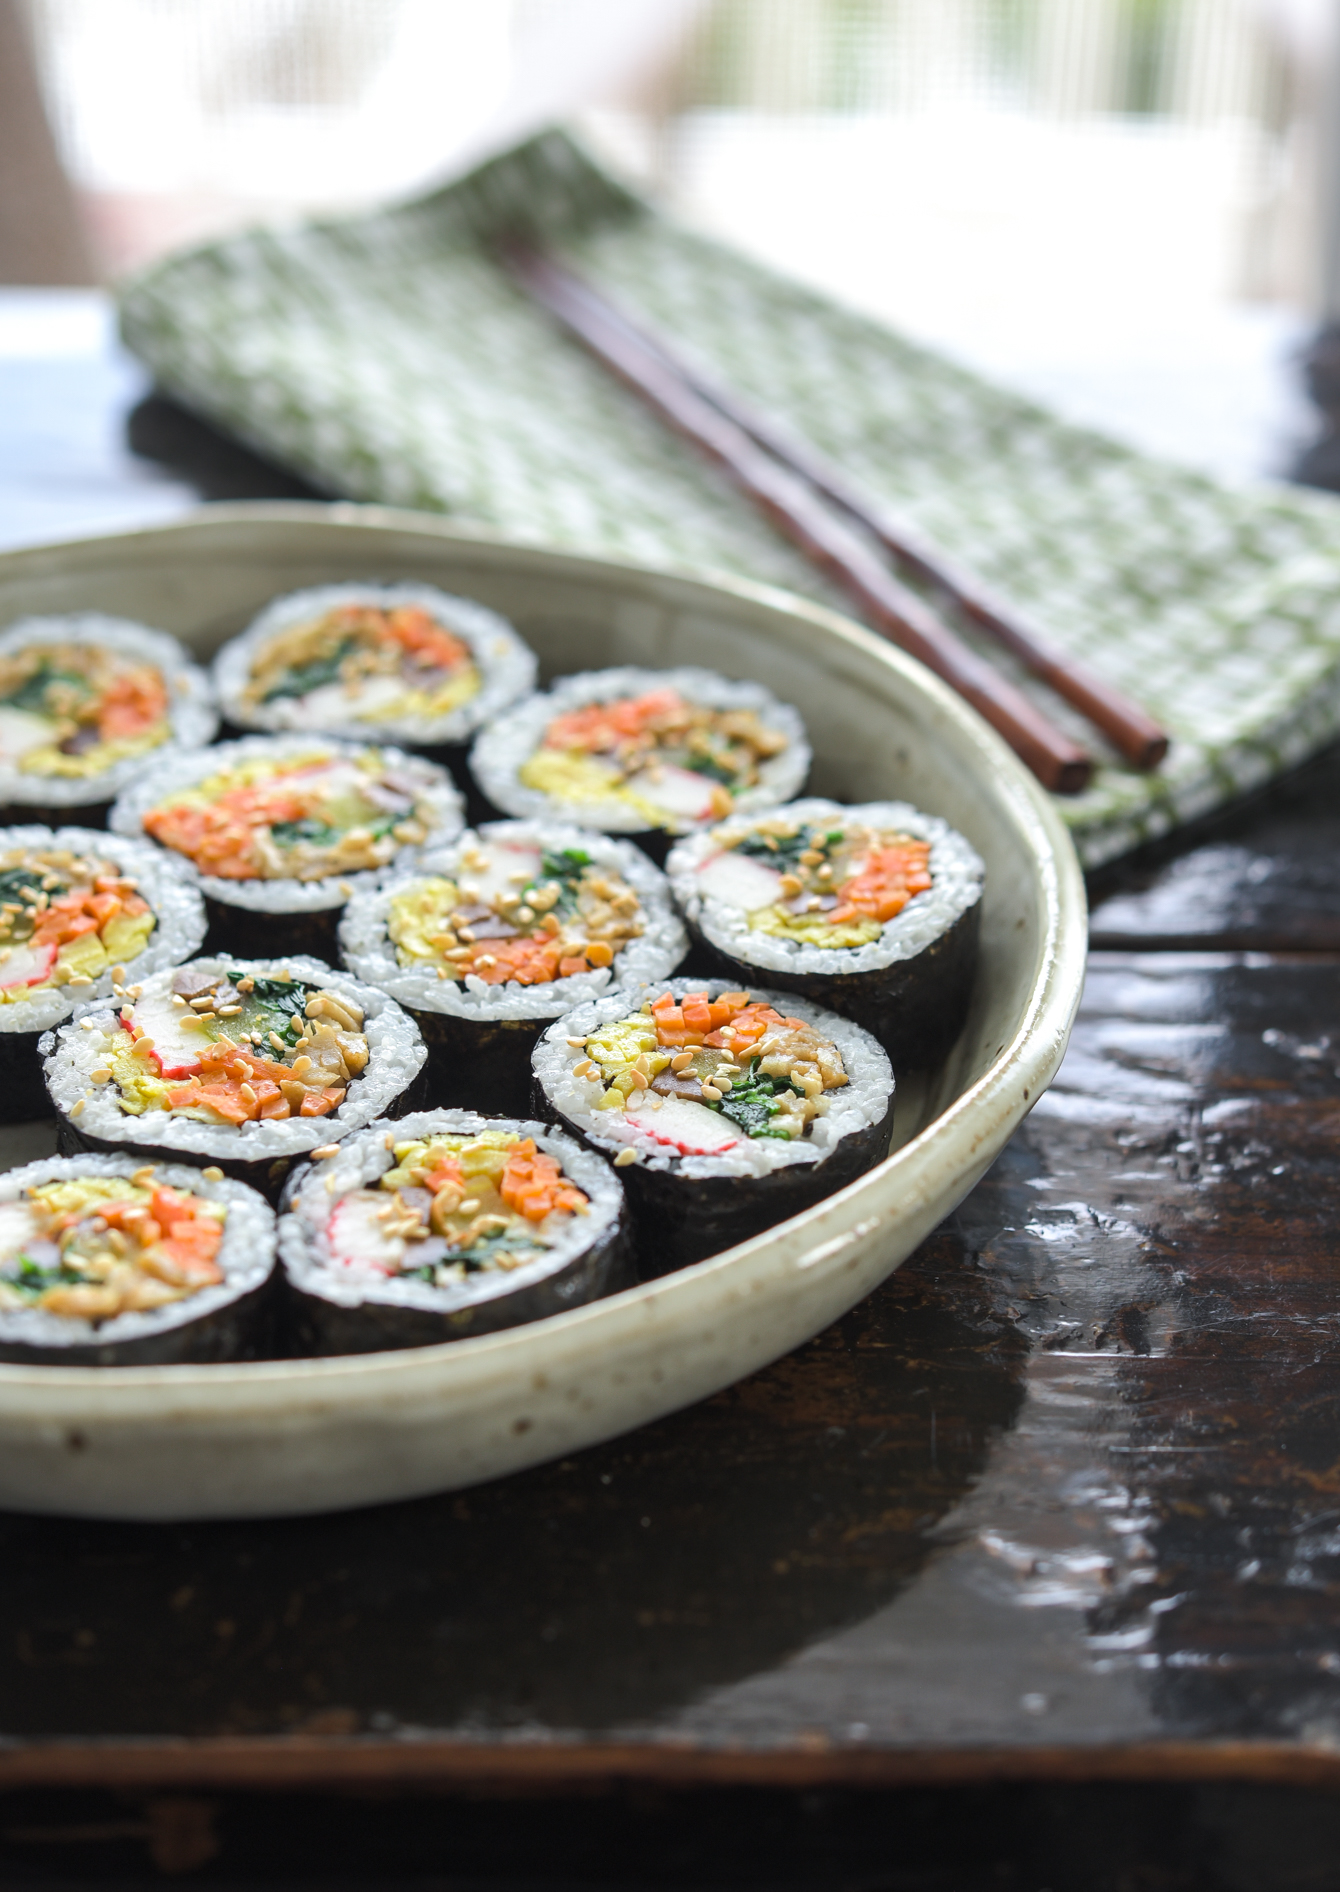 Kimbap pieces are garnished with toasted sesame seeds and placed in a serving dish.